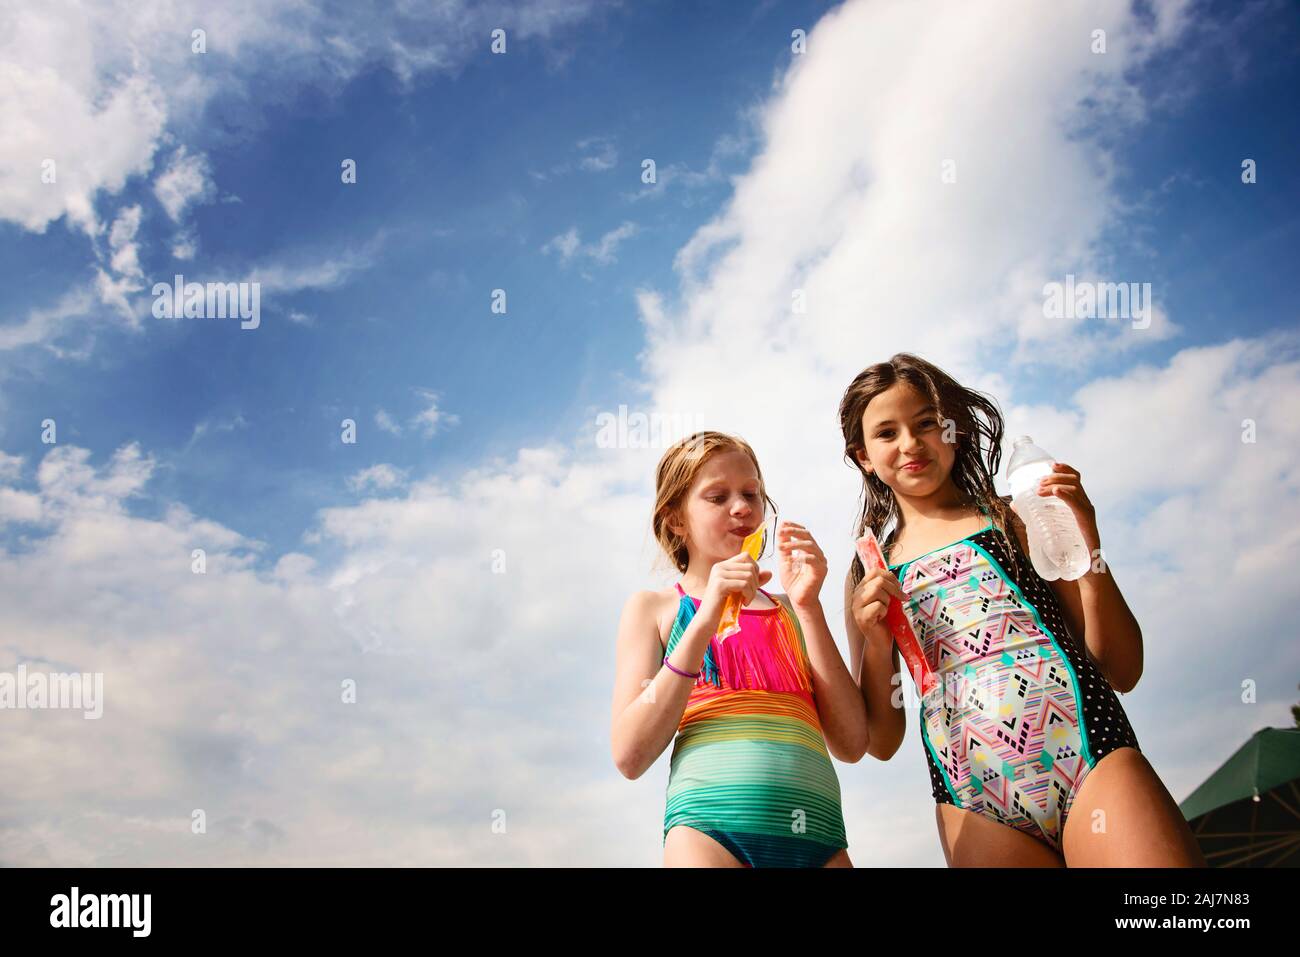 Two Young Girls in Swimsuits With Frozen Treats Against Blue Sky Stock Photo